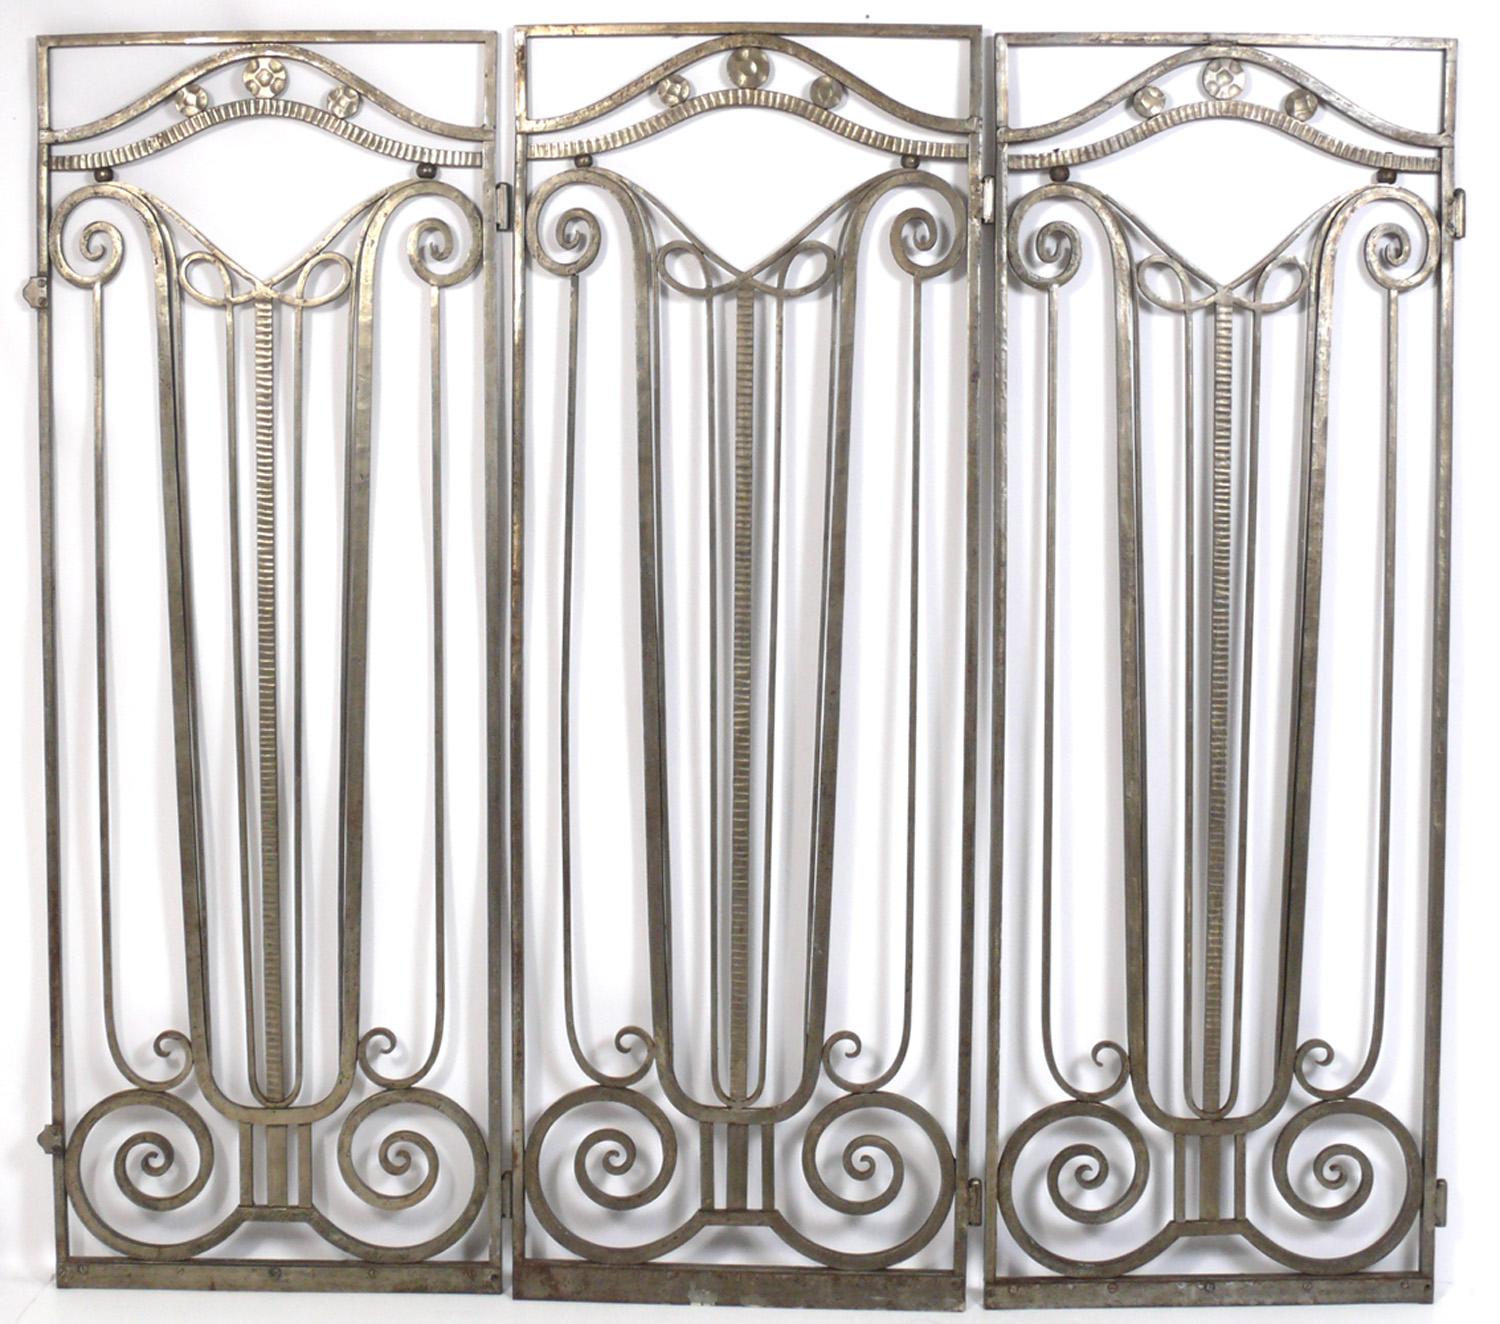 French Art Deco Silvered Iron Gates, in the manner of Edgar Brandt, unsigned, France, circa 1930s. They are a wonderful example of architectural salvage, constructed of hand wrought iron. They retain their original patina with some isolated areas of